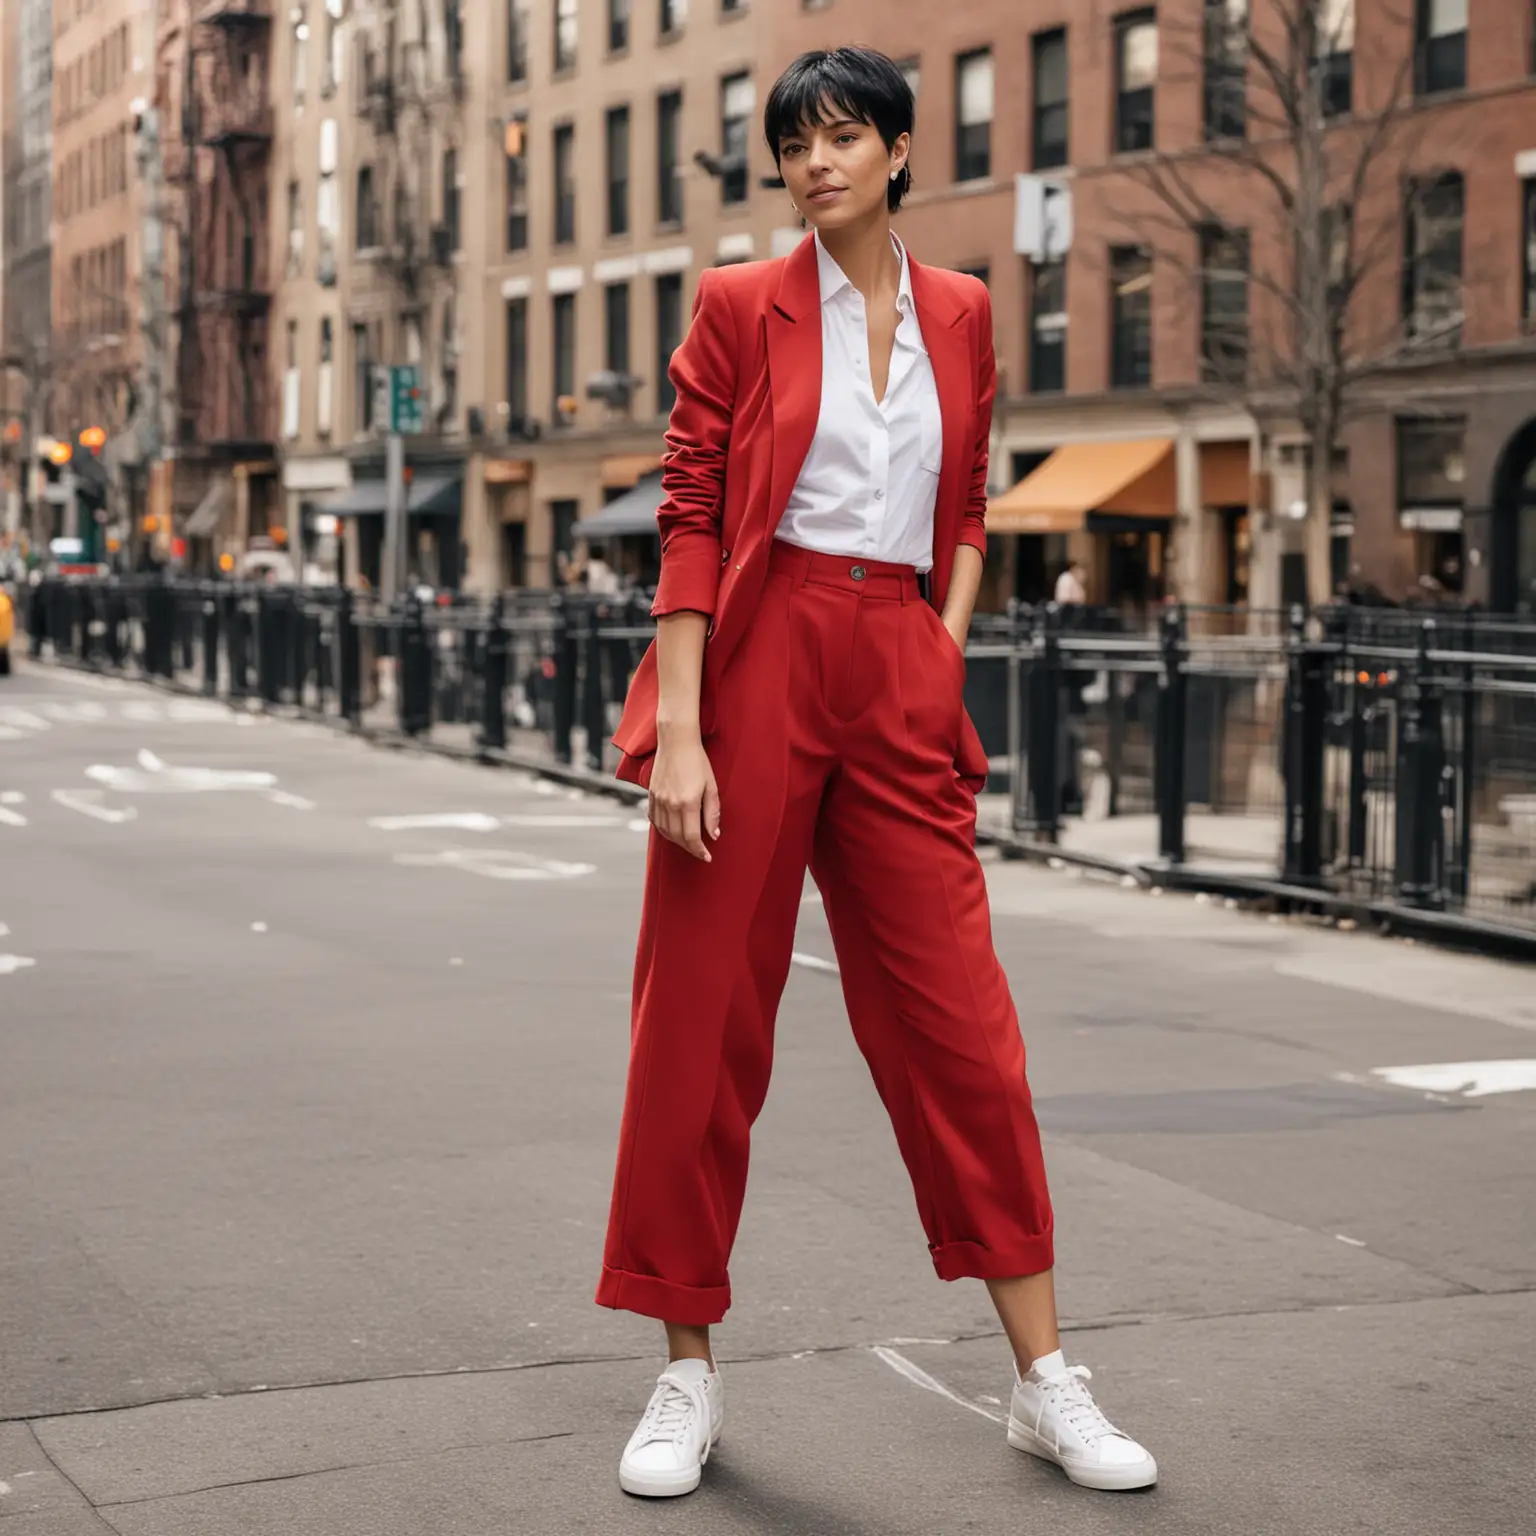 Stylish Woman in Red Blazer Walking the Streets of New York